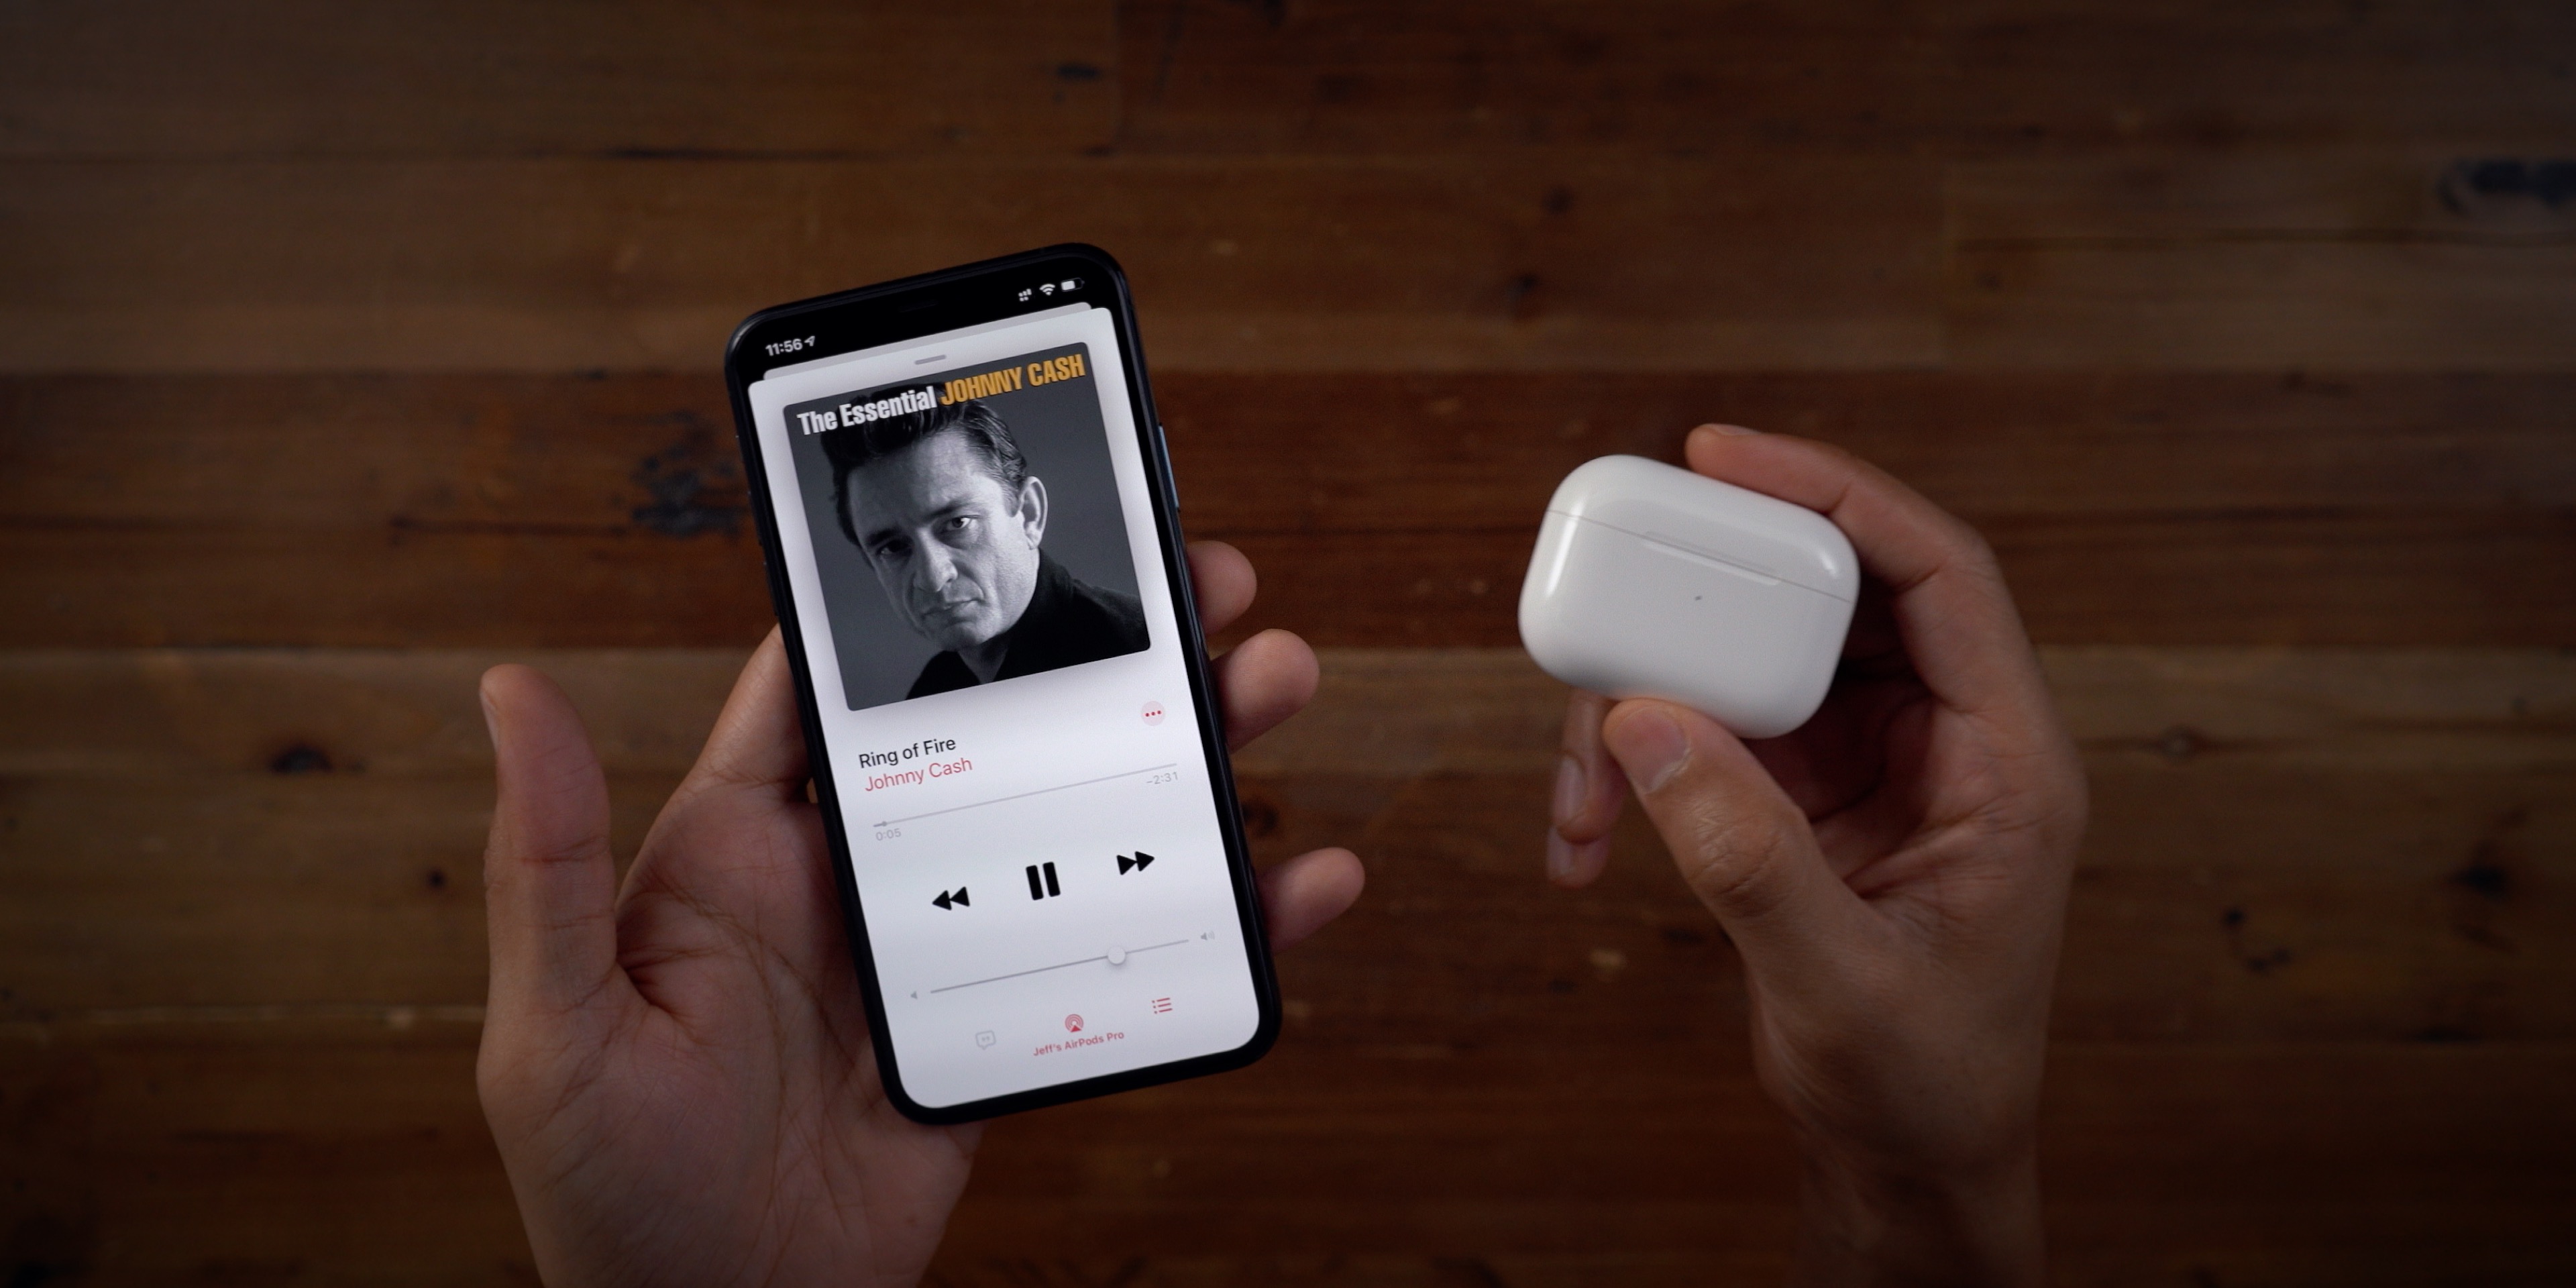 AirPods Pro review - within earshot of perfection 9to5Mac